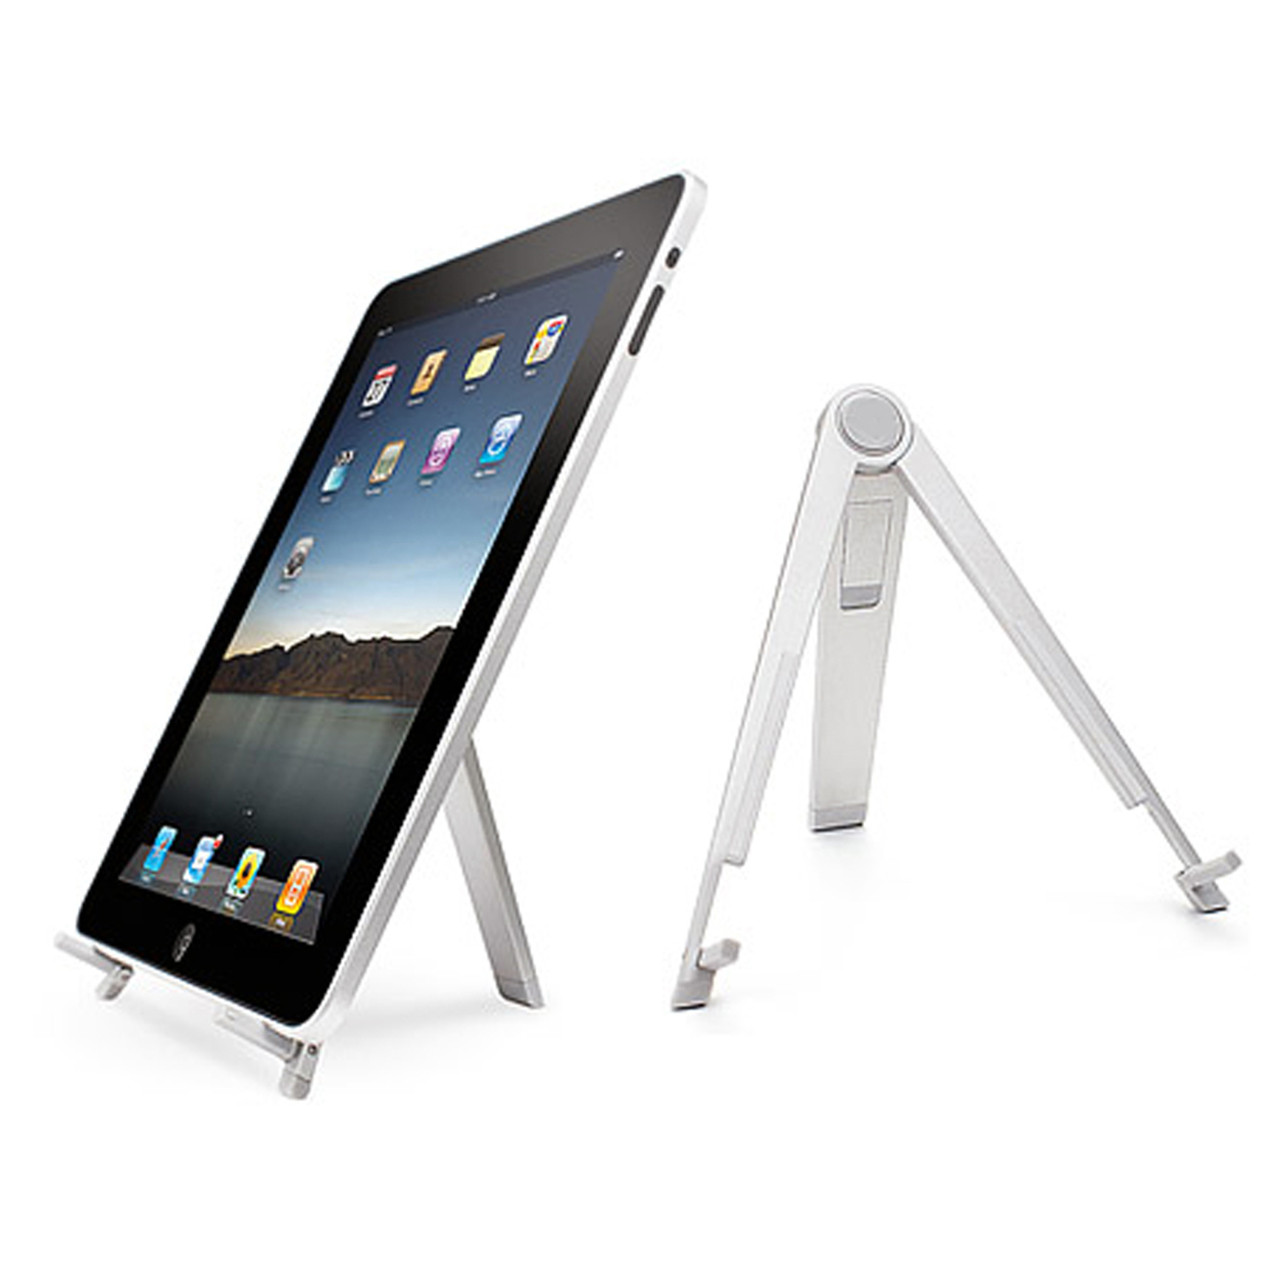 Lupo Universal Folding Desk Stand For Ipad Air Mini Tablets